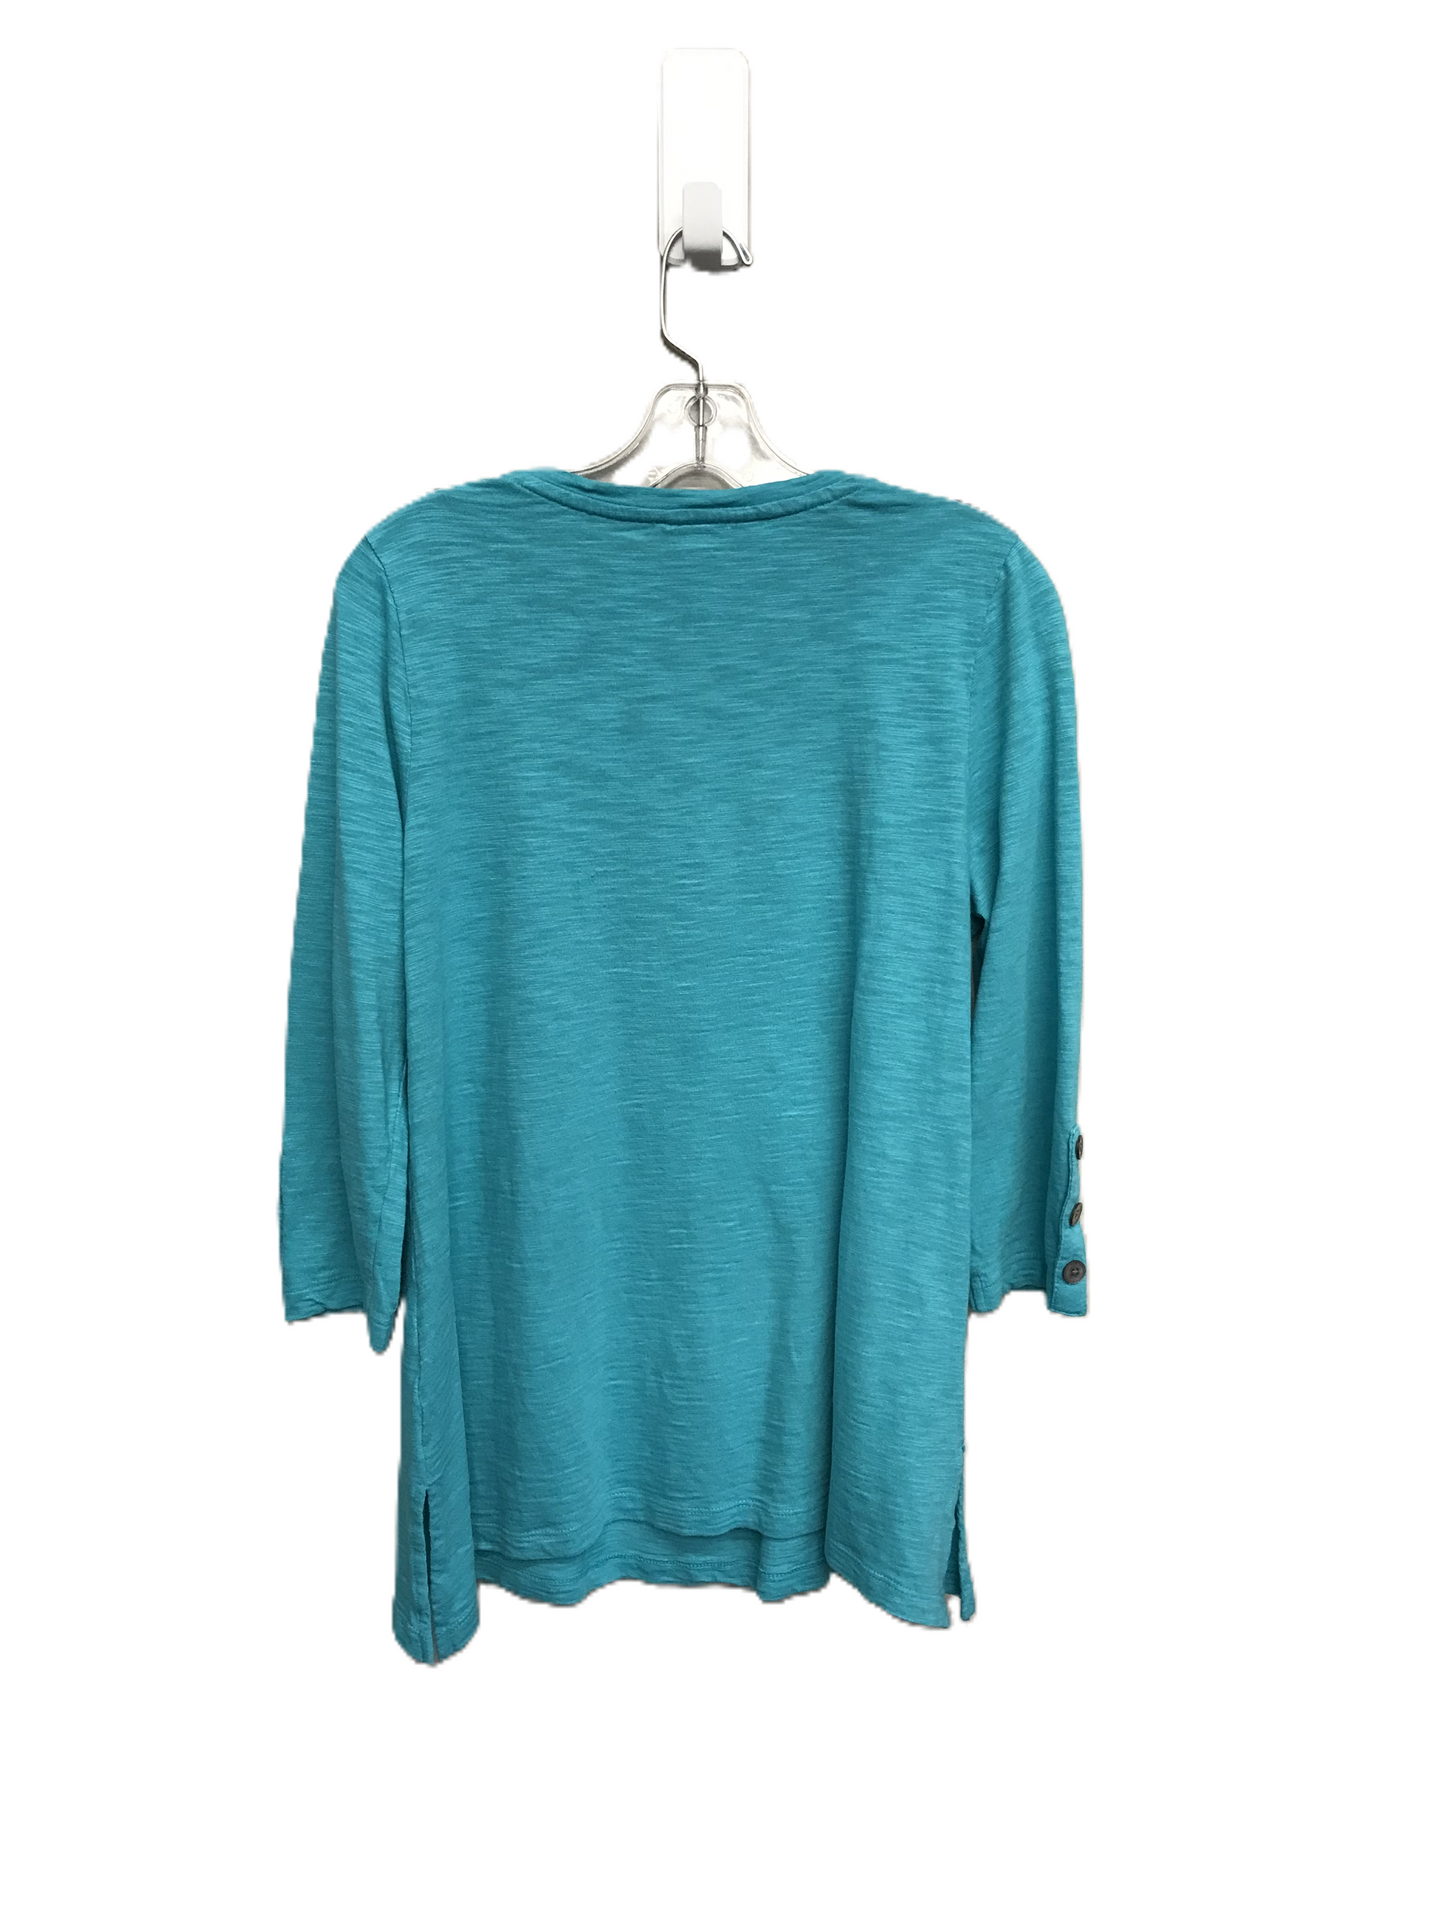 Aqua Top 3/4 Sleeve By Chicos, Size: M